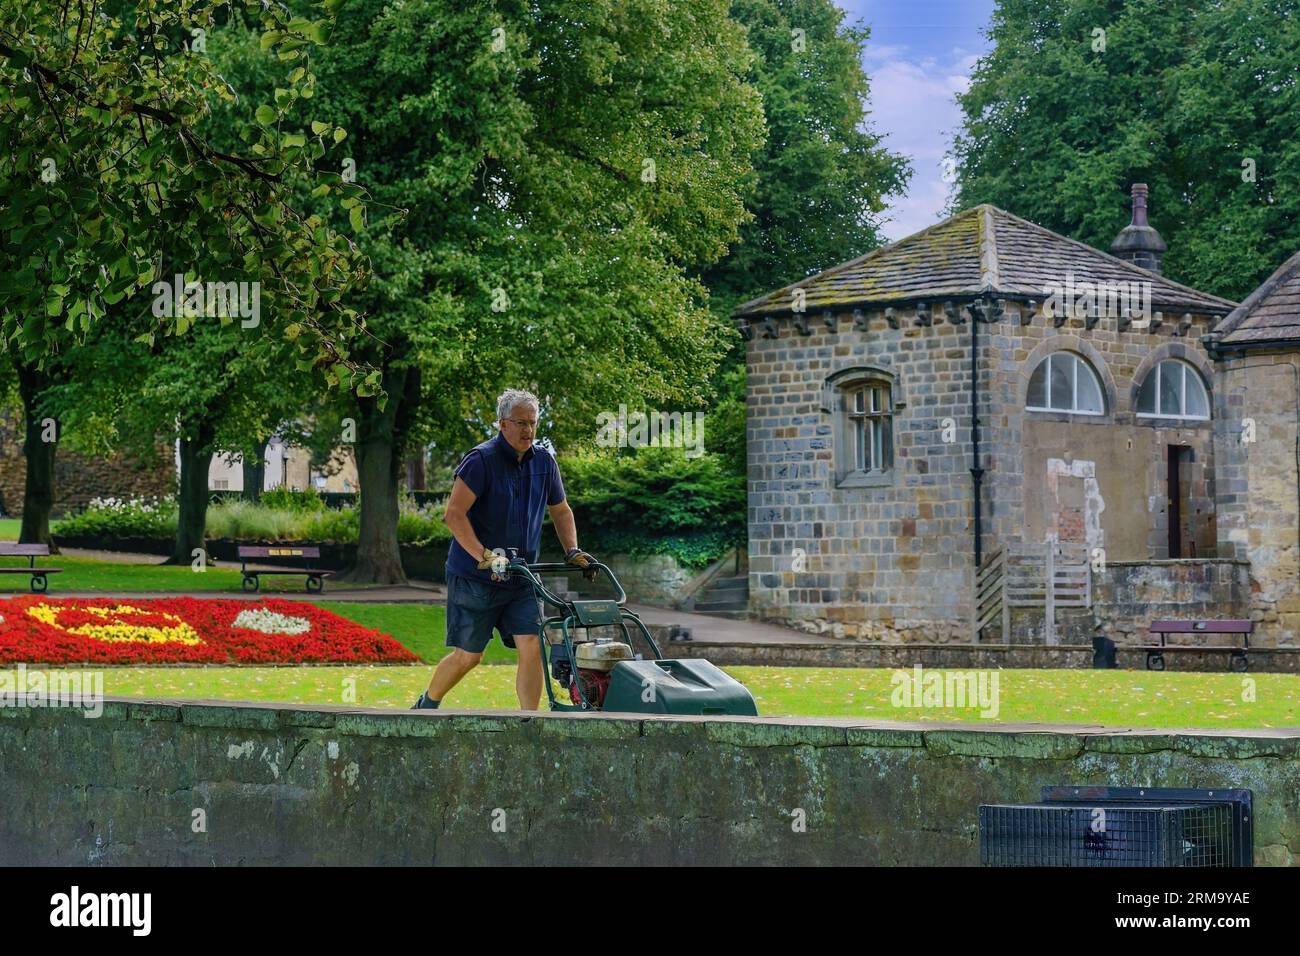 Trees and buildings in the background as a senior gardener cuts grass with a lawnmower,Knaresborough,North Yorkshire,UK. Stock Photo